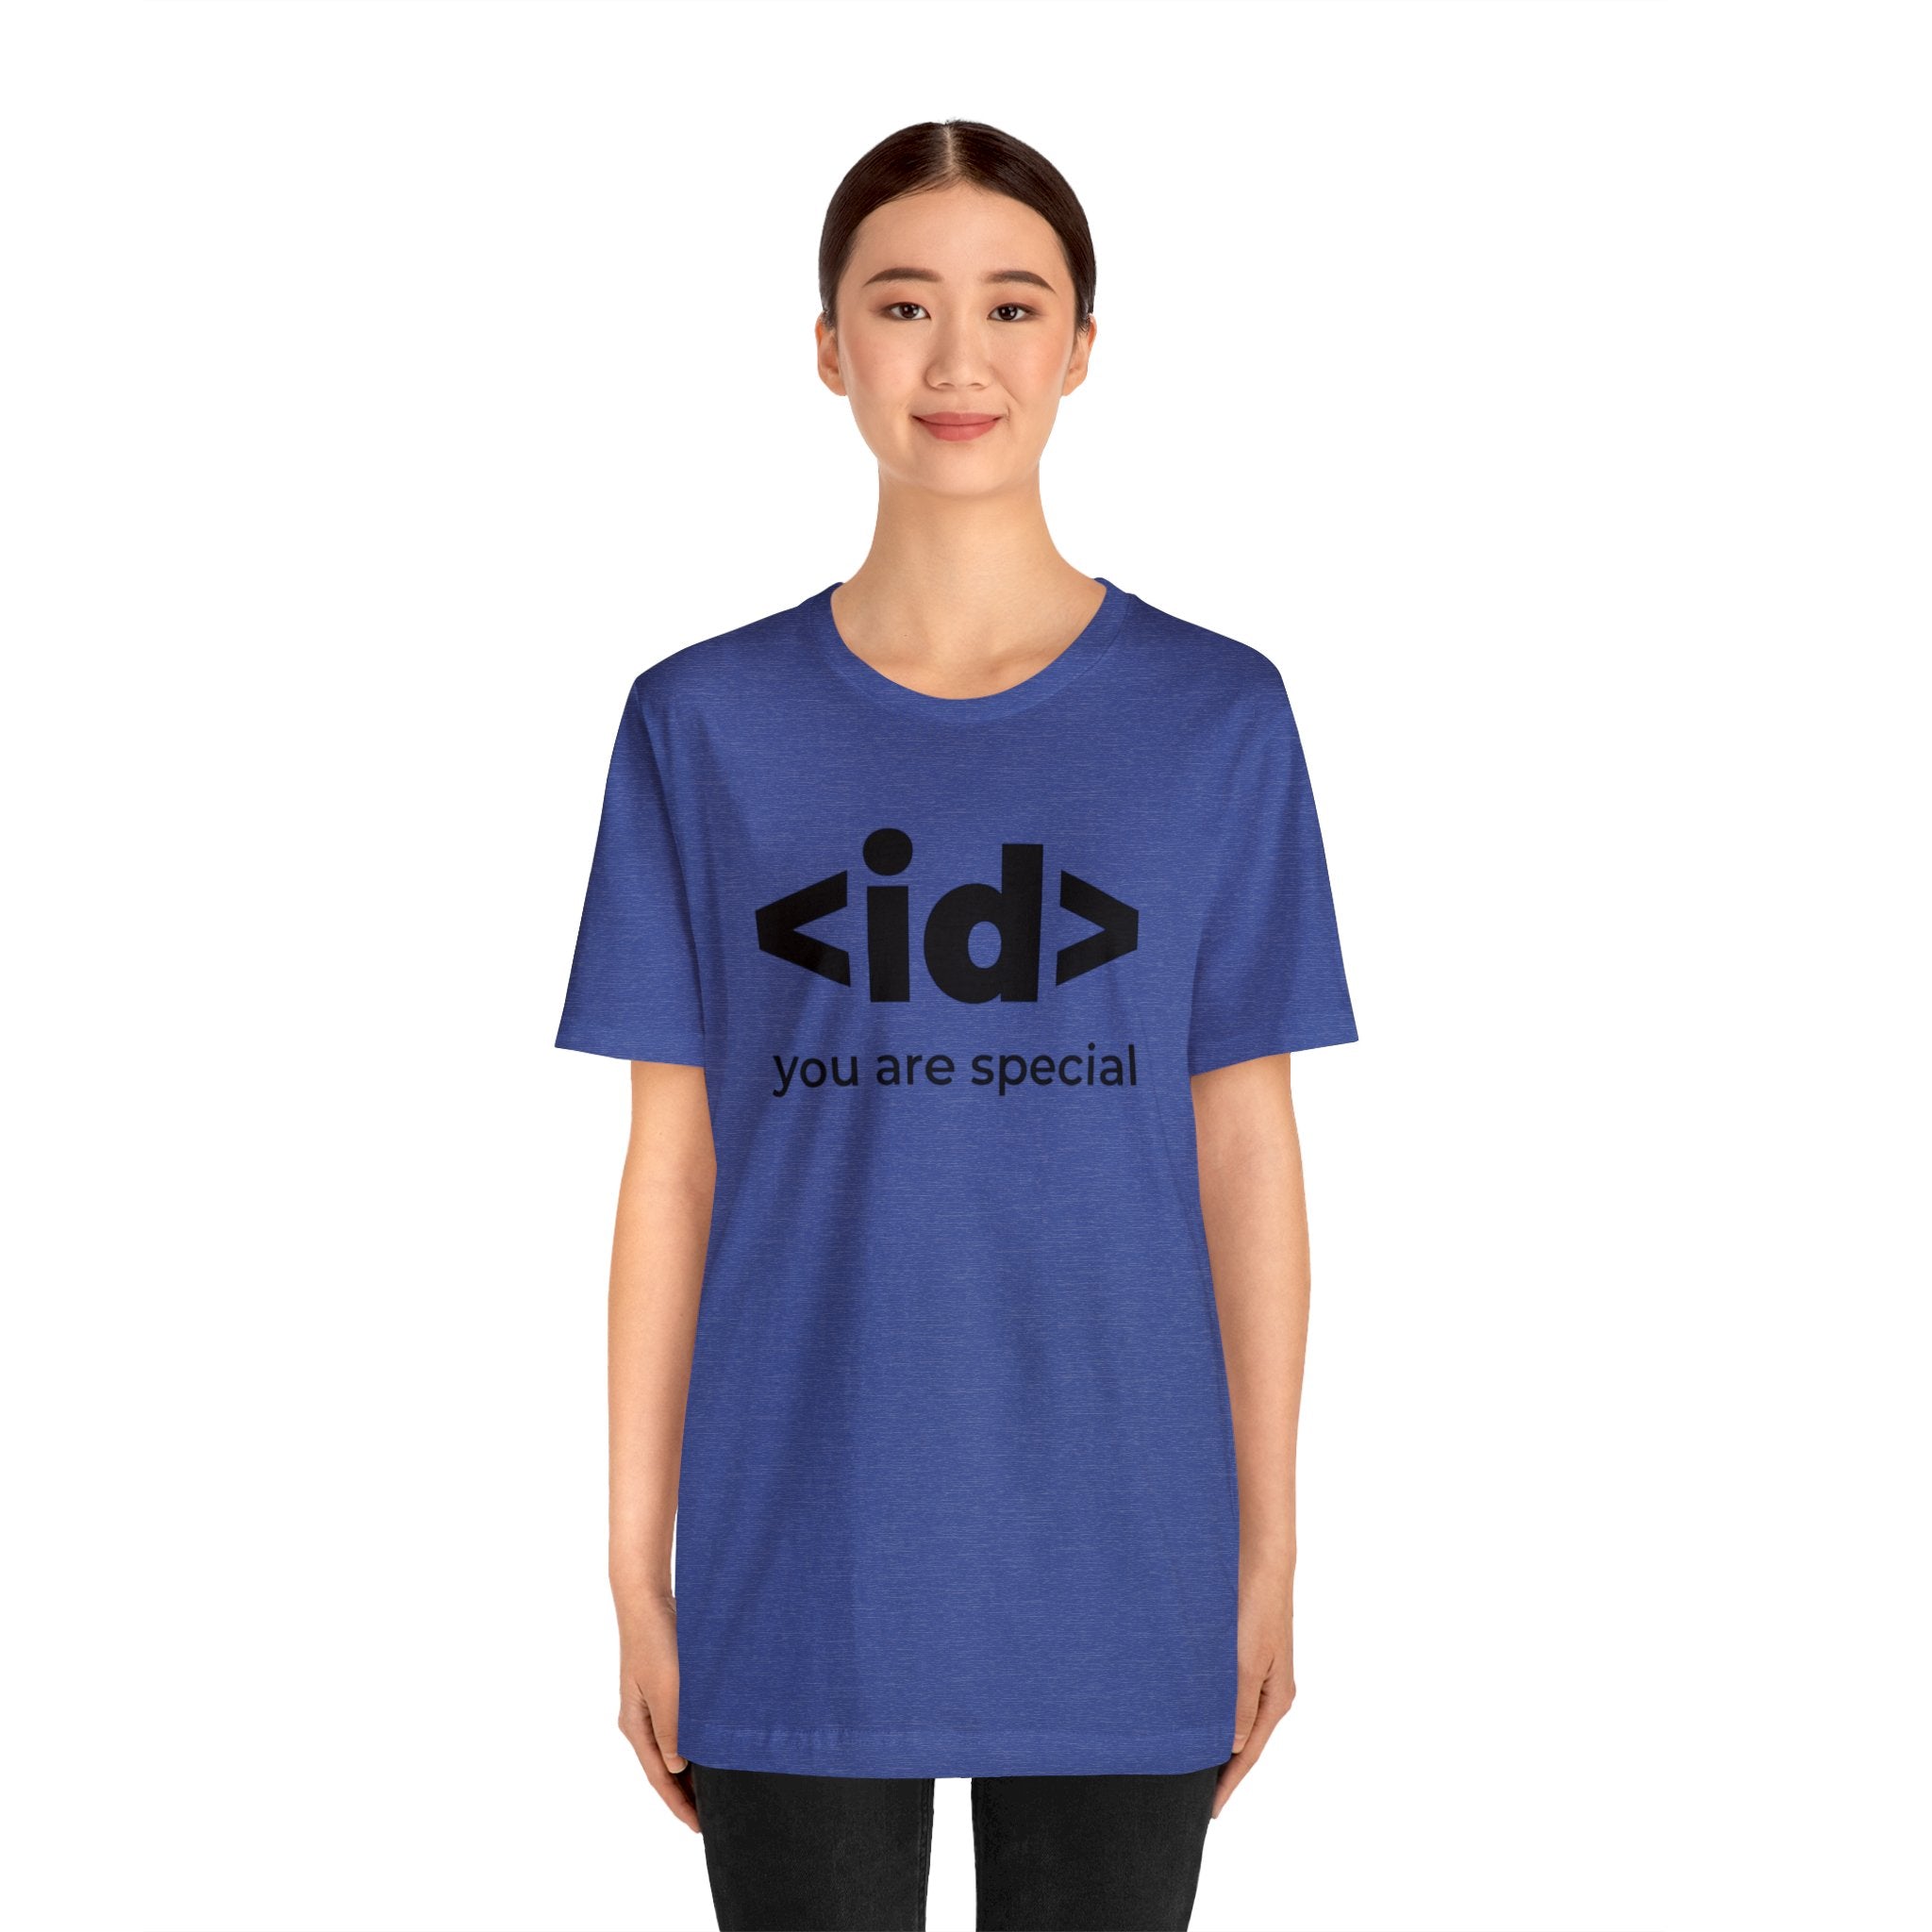 A brilliant woman showing off her blue <id> You Are Special T-Shirt with the word dbi printed on it.